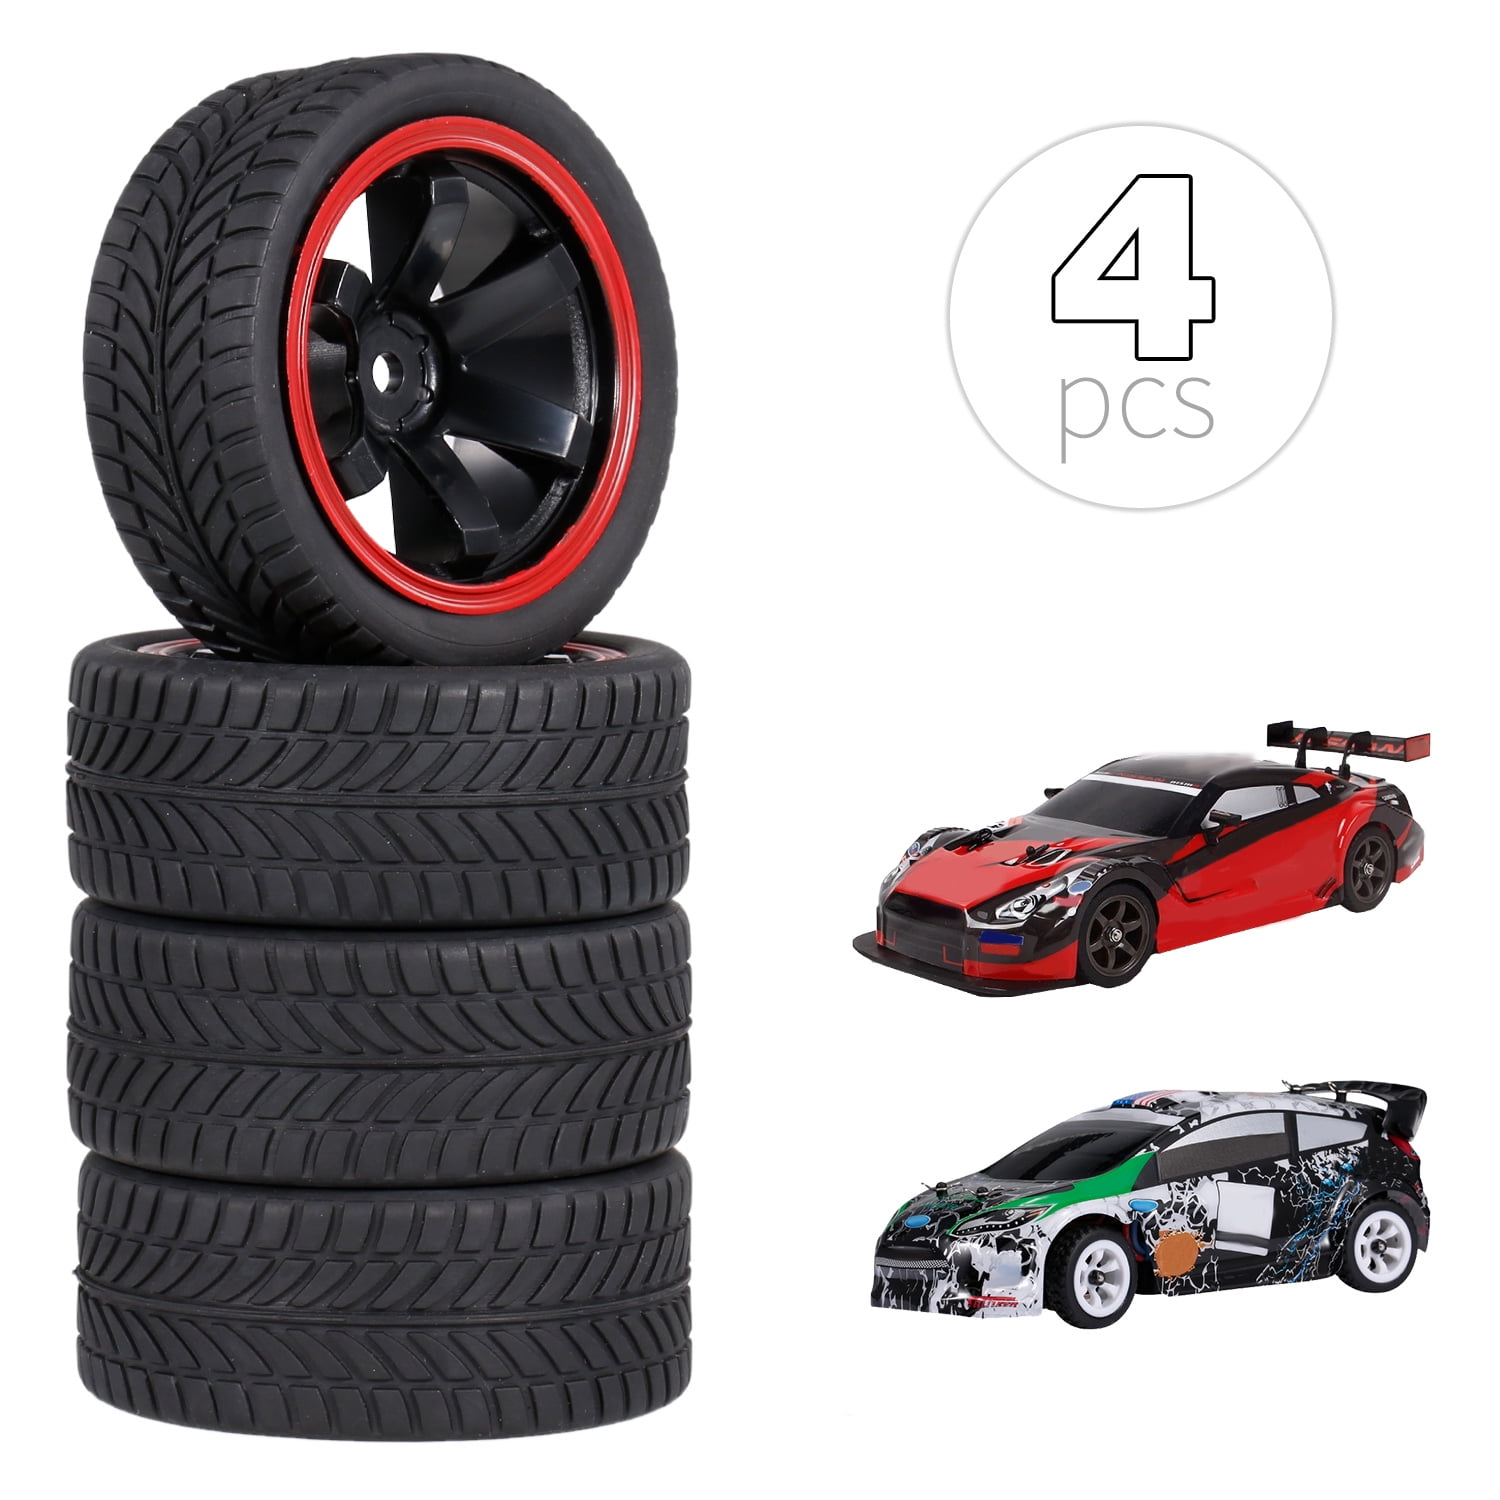 4PCS 1/10 Rubber Tire RC Racing Car Tires For HSP Redcat Traxxas Tamiya HPI T4T9 